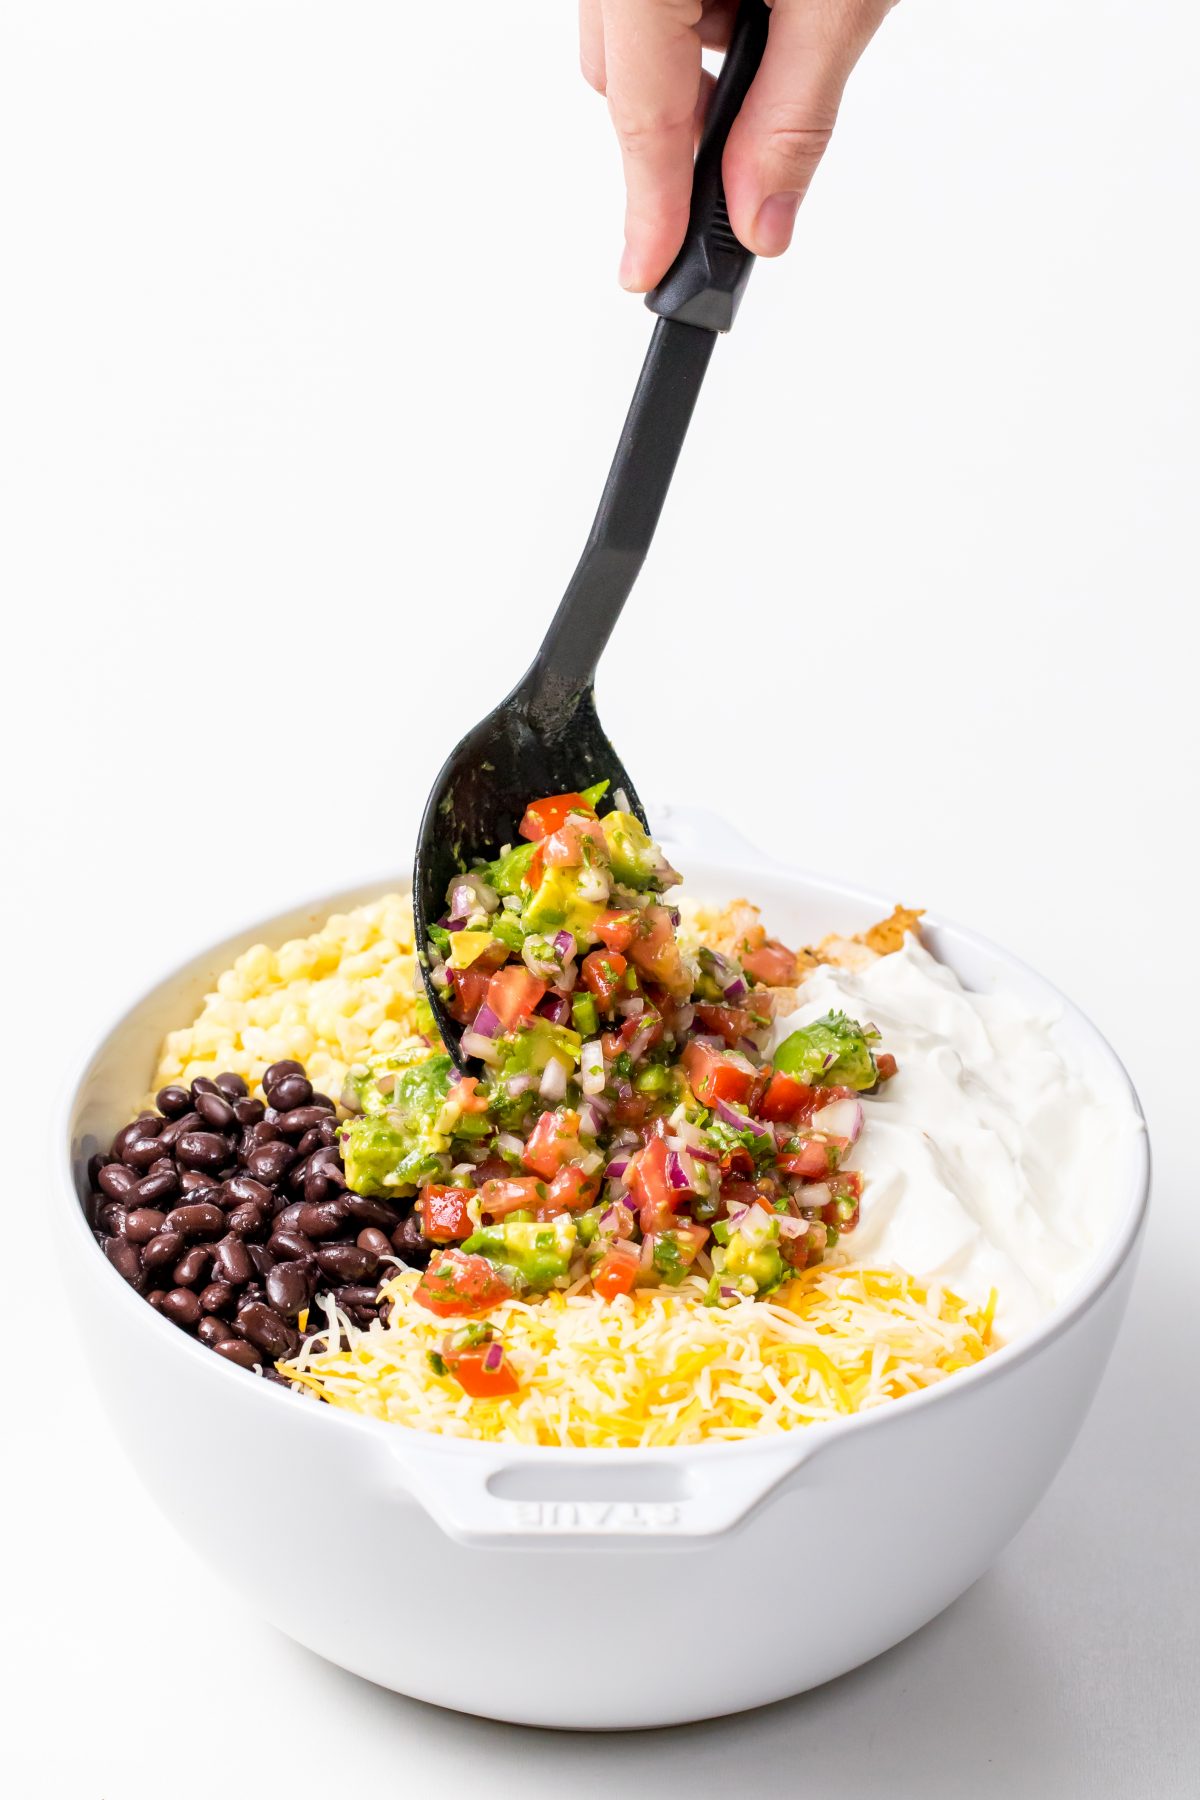 Colorful salsa goes on the top for Grilled chicken and quinoa burrito bowls with avocado salsa